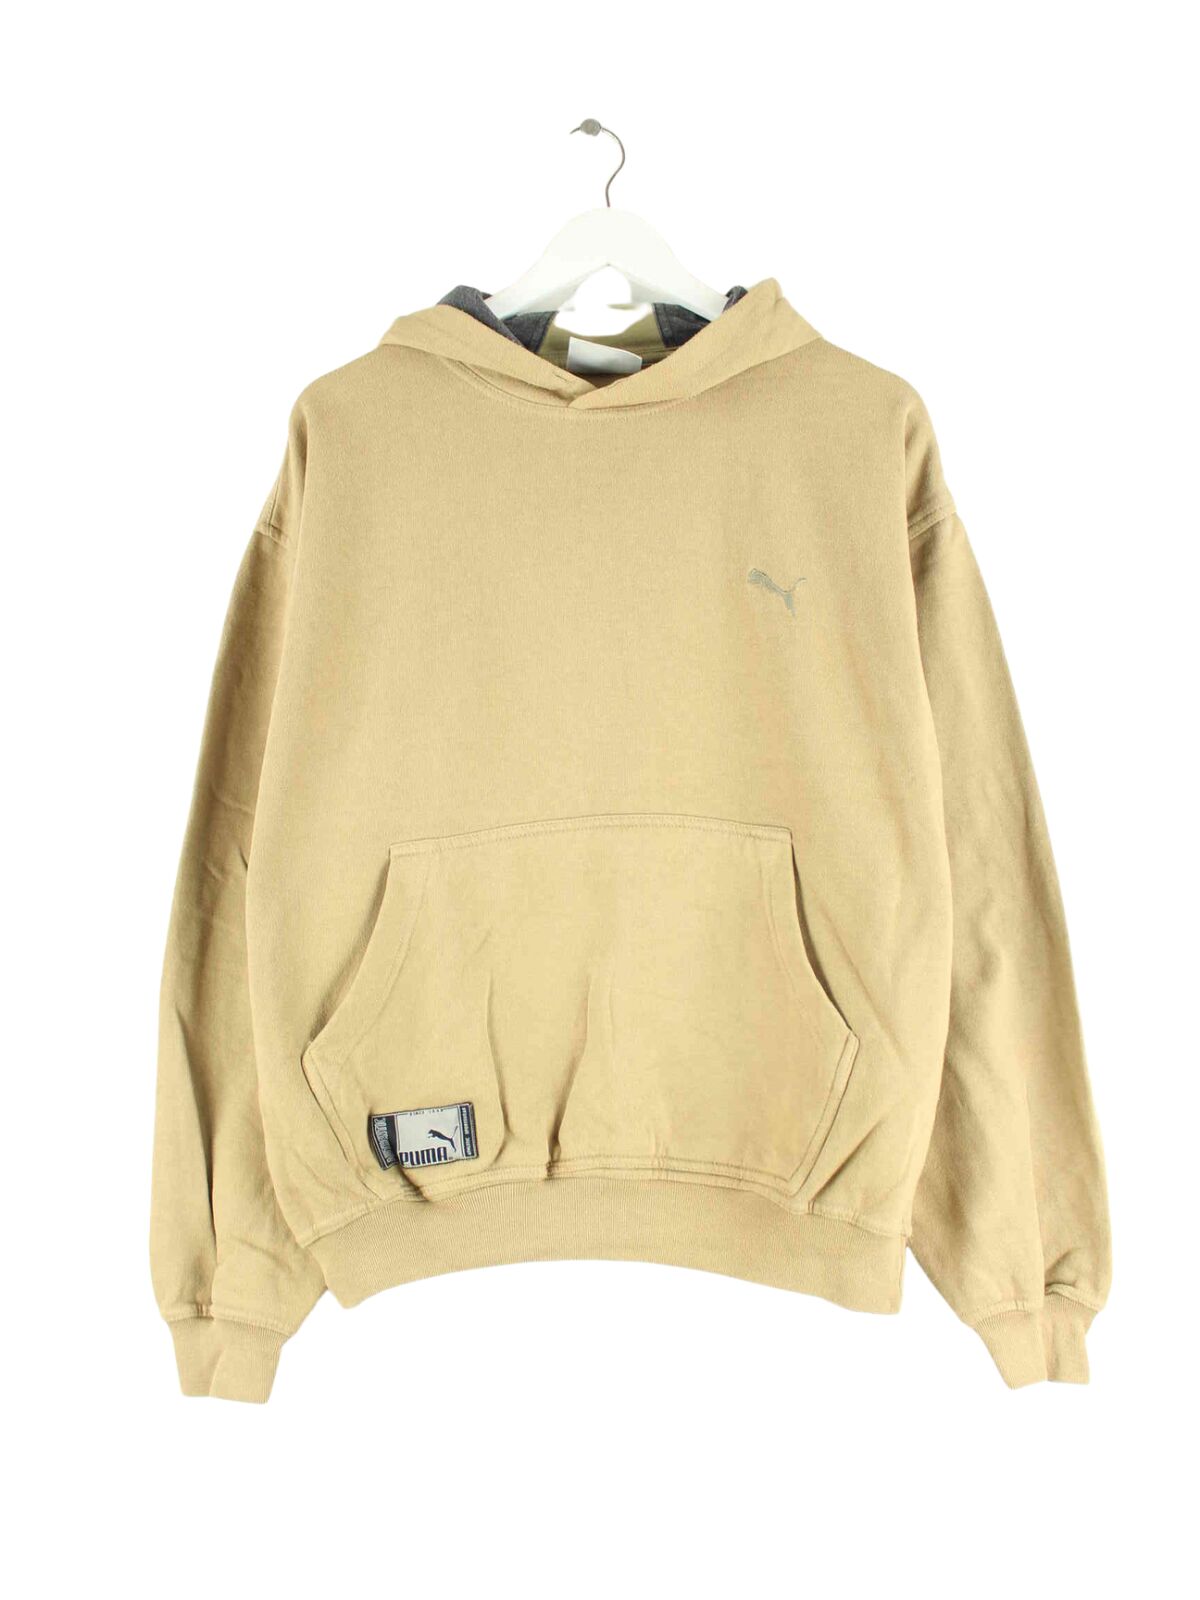 Puma 00s Embroidered Hoodie Beige L (front image)